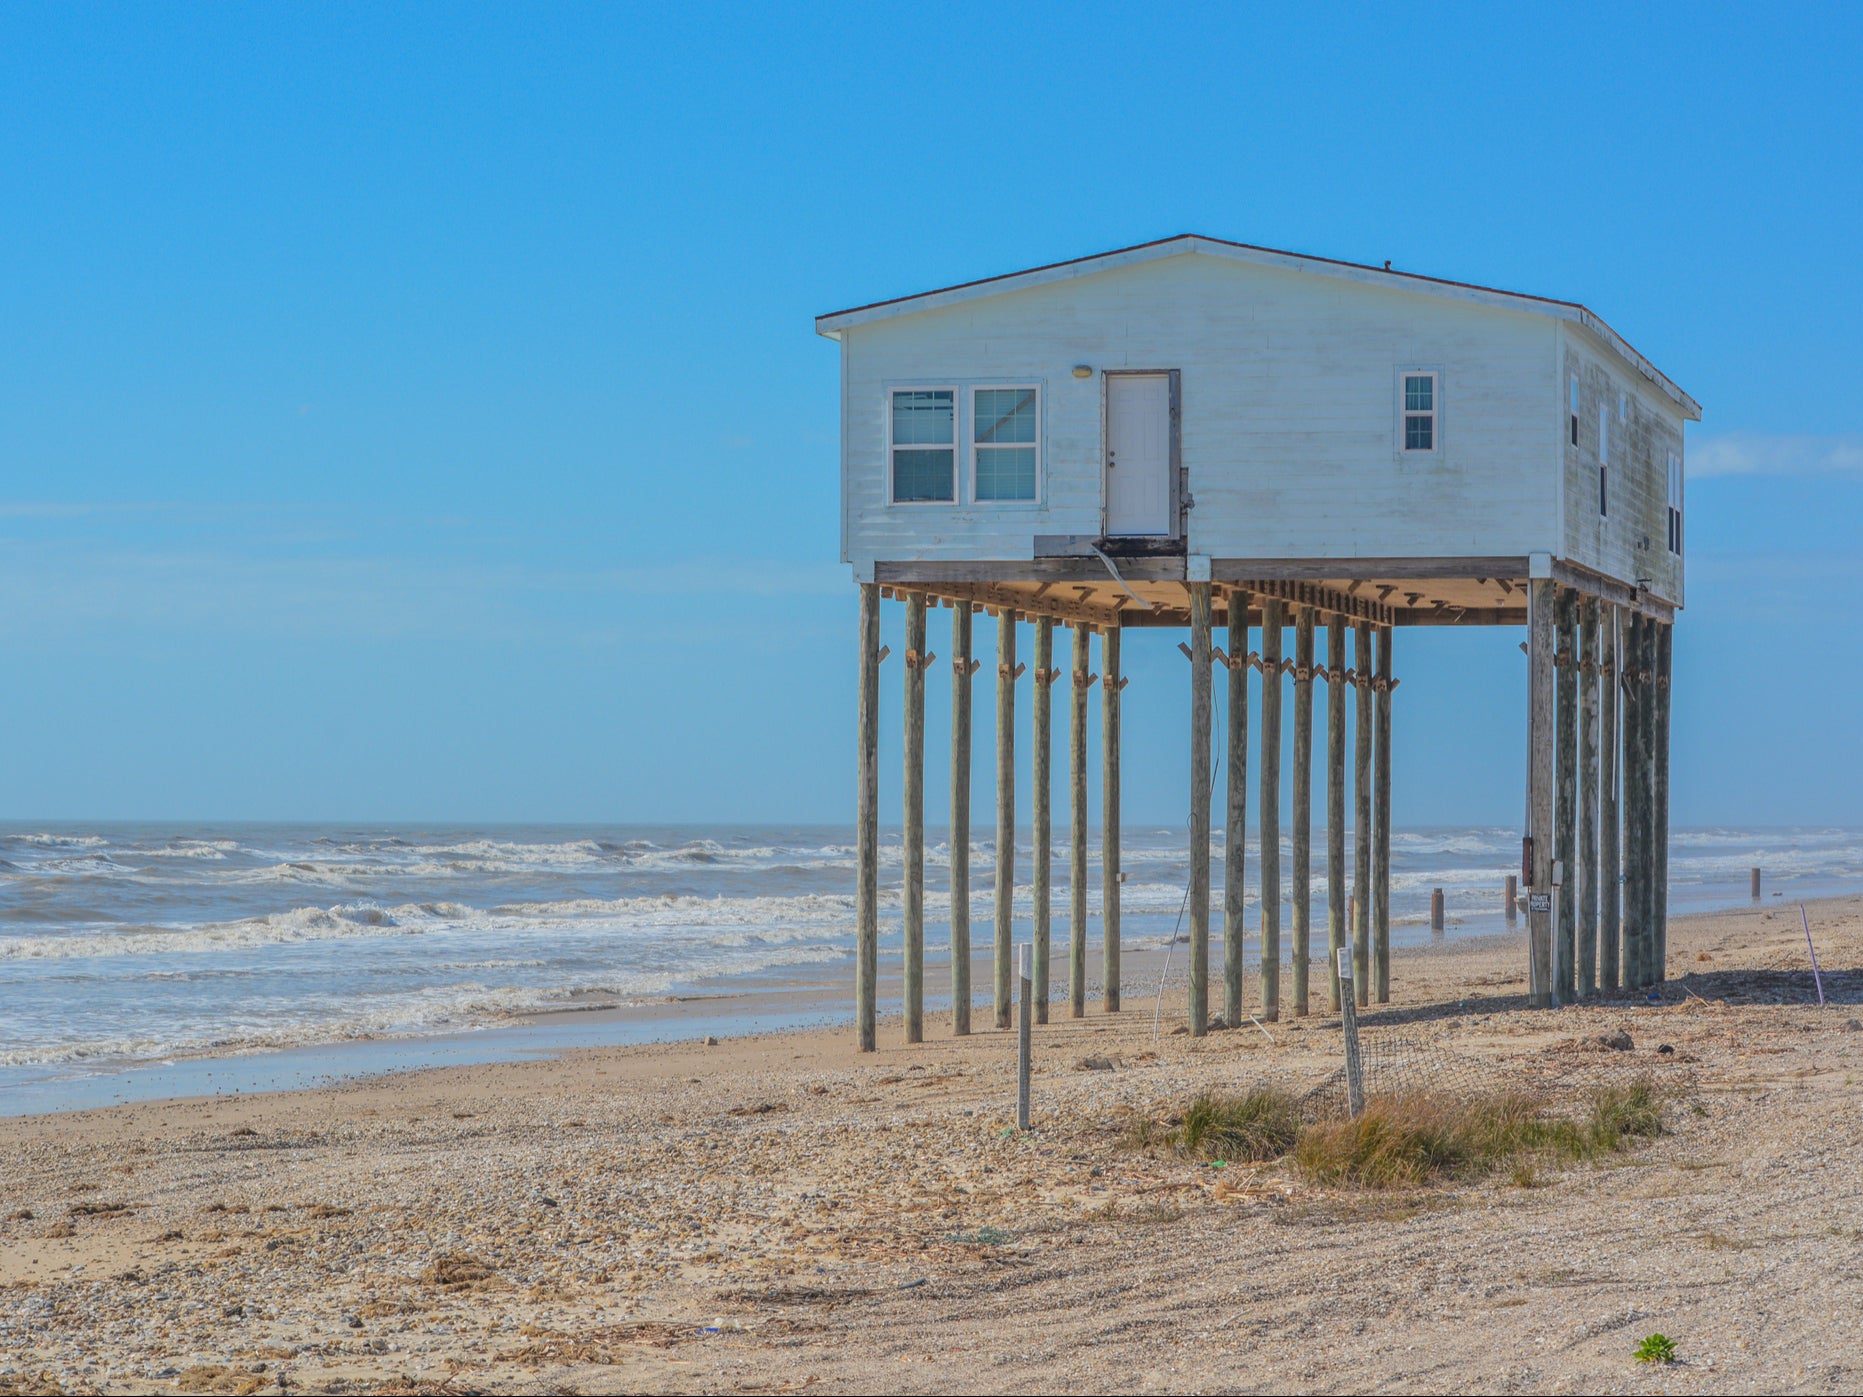 An abandoned house on a Texas beach in the Gulf of Mexico. We can only adapt to the climate crisis up to a point, so we must take action to limit the damage, scientists warn